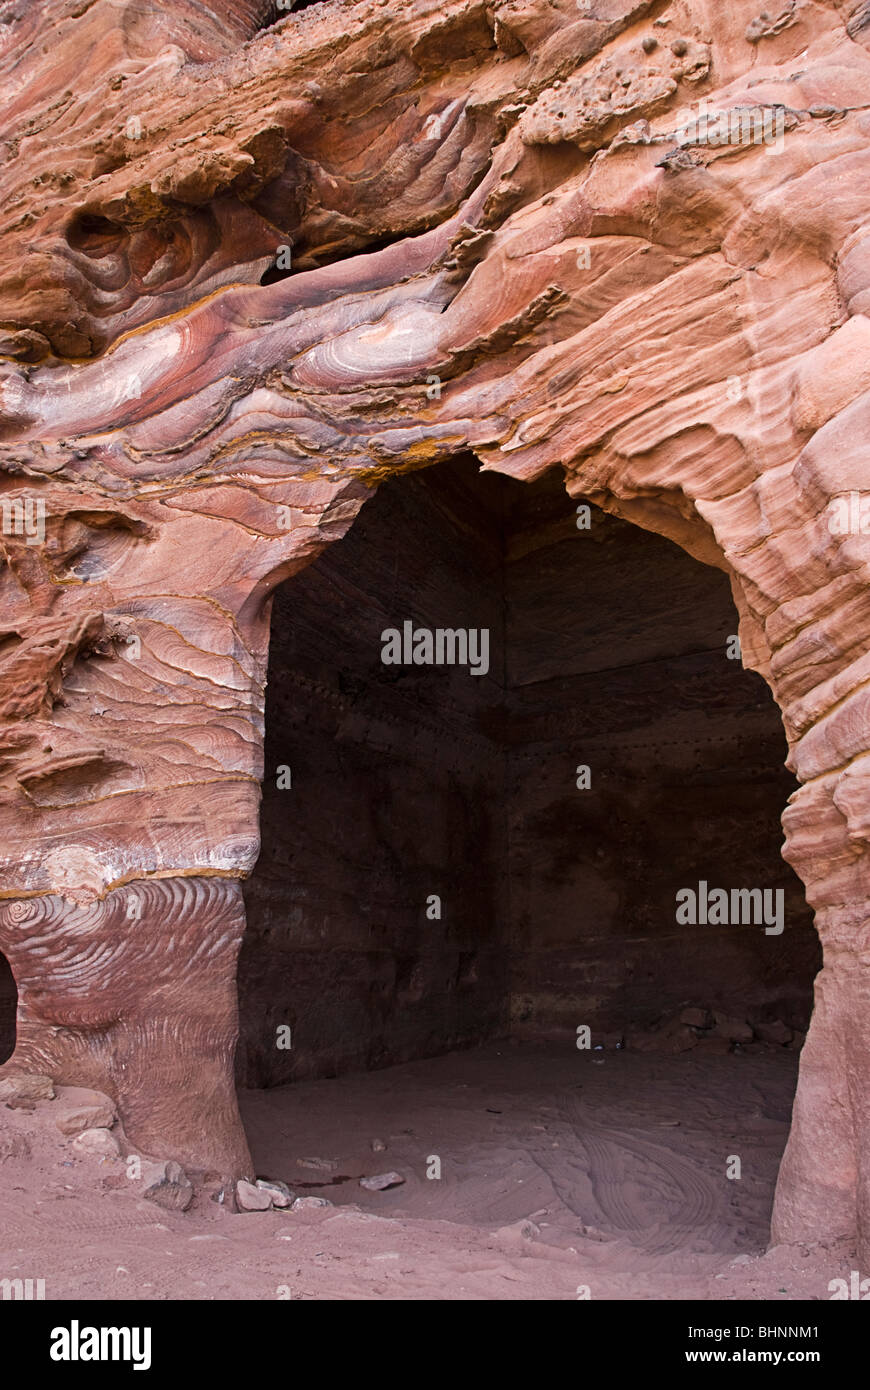 One of the many buildings carved on the rock in Petra, Jordan, Asia. Stock Photo